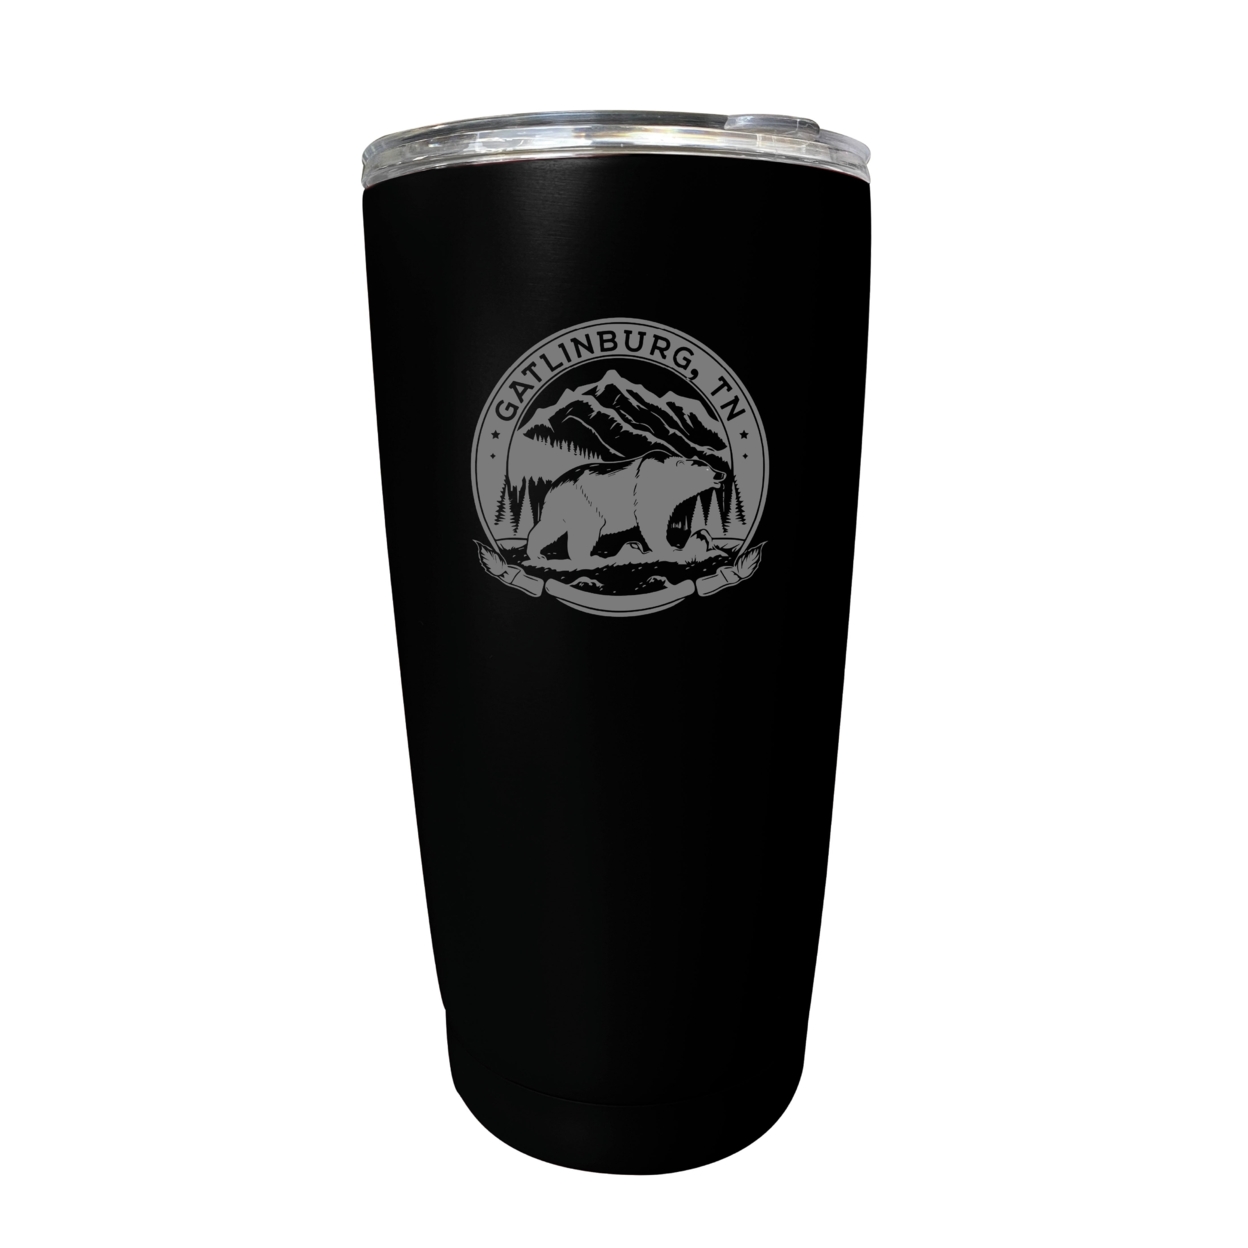 Gatlinburg Tennessee Laser Etched Souvenir 16 Oz Stainless Steel Insulated Tumbler - Black